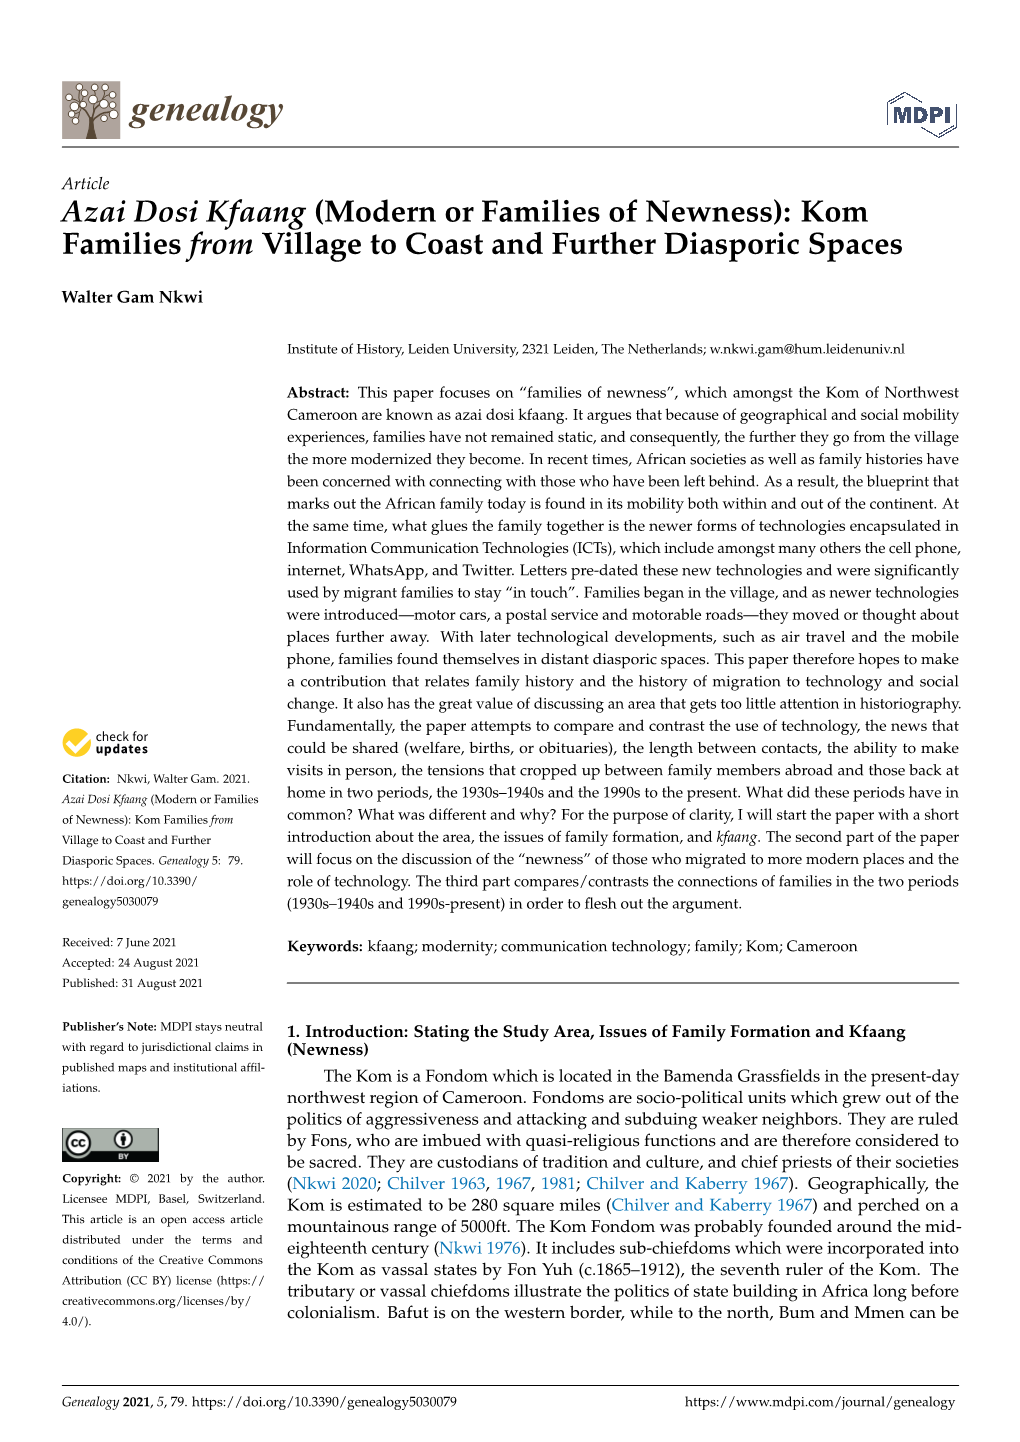 Kom Families from Village to Coast and Further Diasporic Spaces